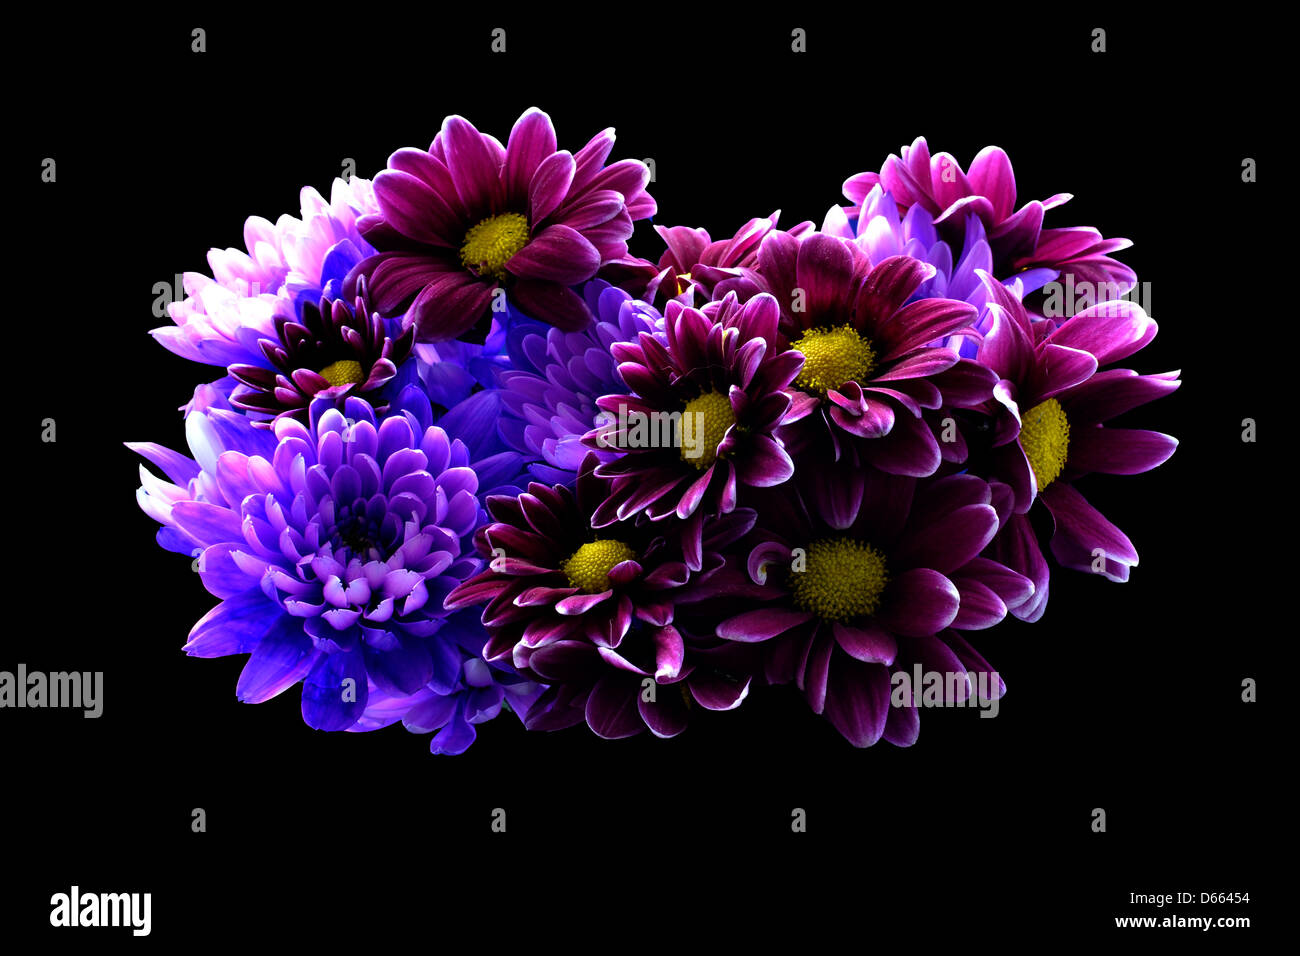 bunch of purple and mauve flowers Stock Photo